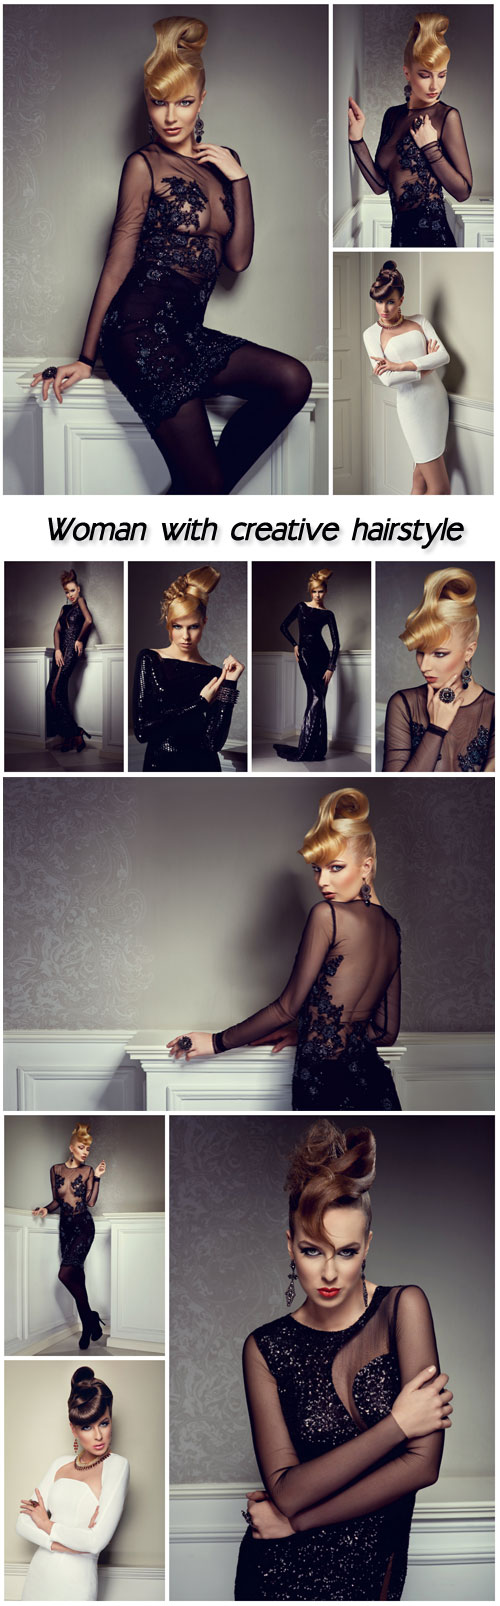 Beautiful blonde woman with creative hairstyle wearing  evening dress